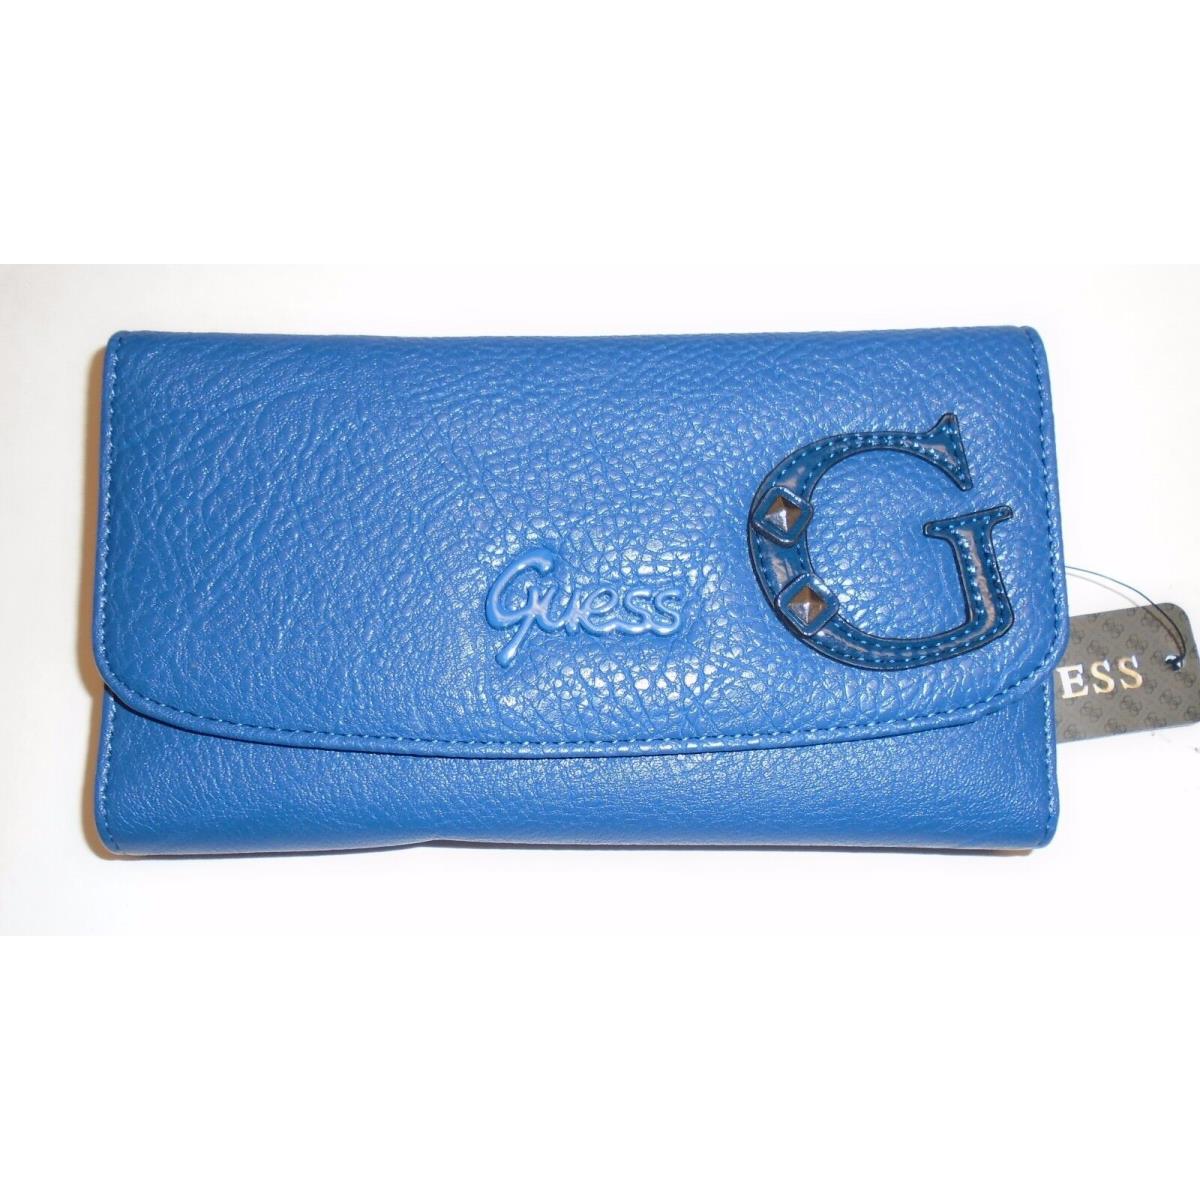 Guess Beainy Slg Blue+white+black G +studs Checkbook Clutch Wallet